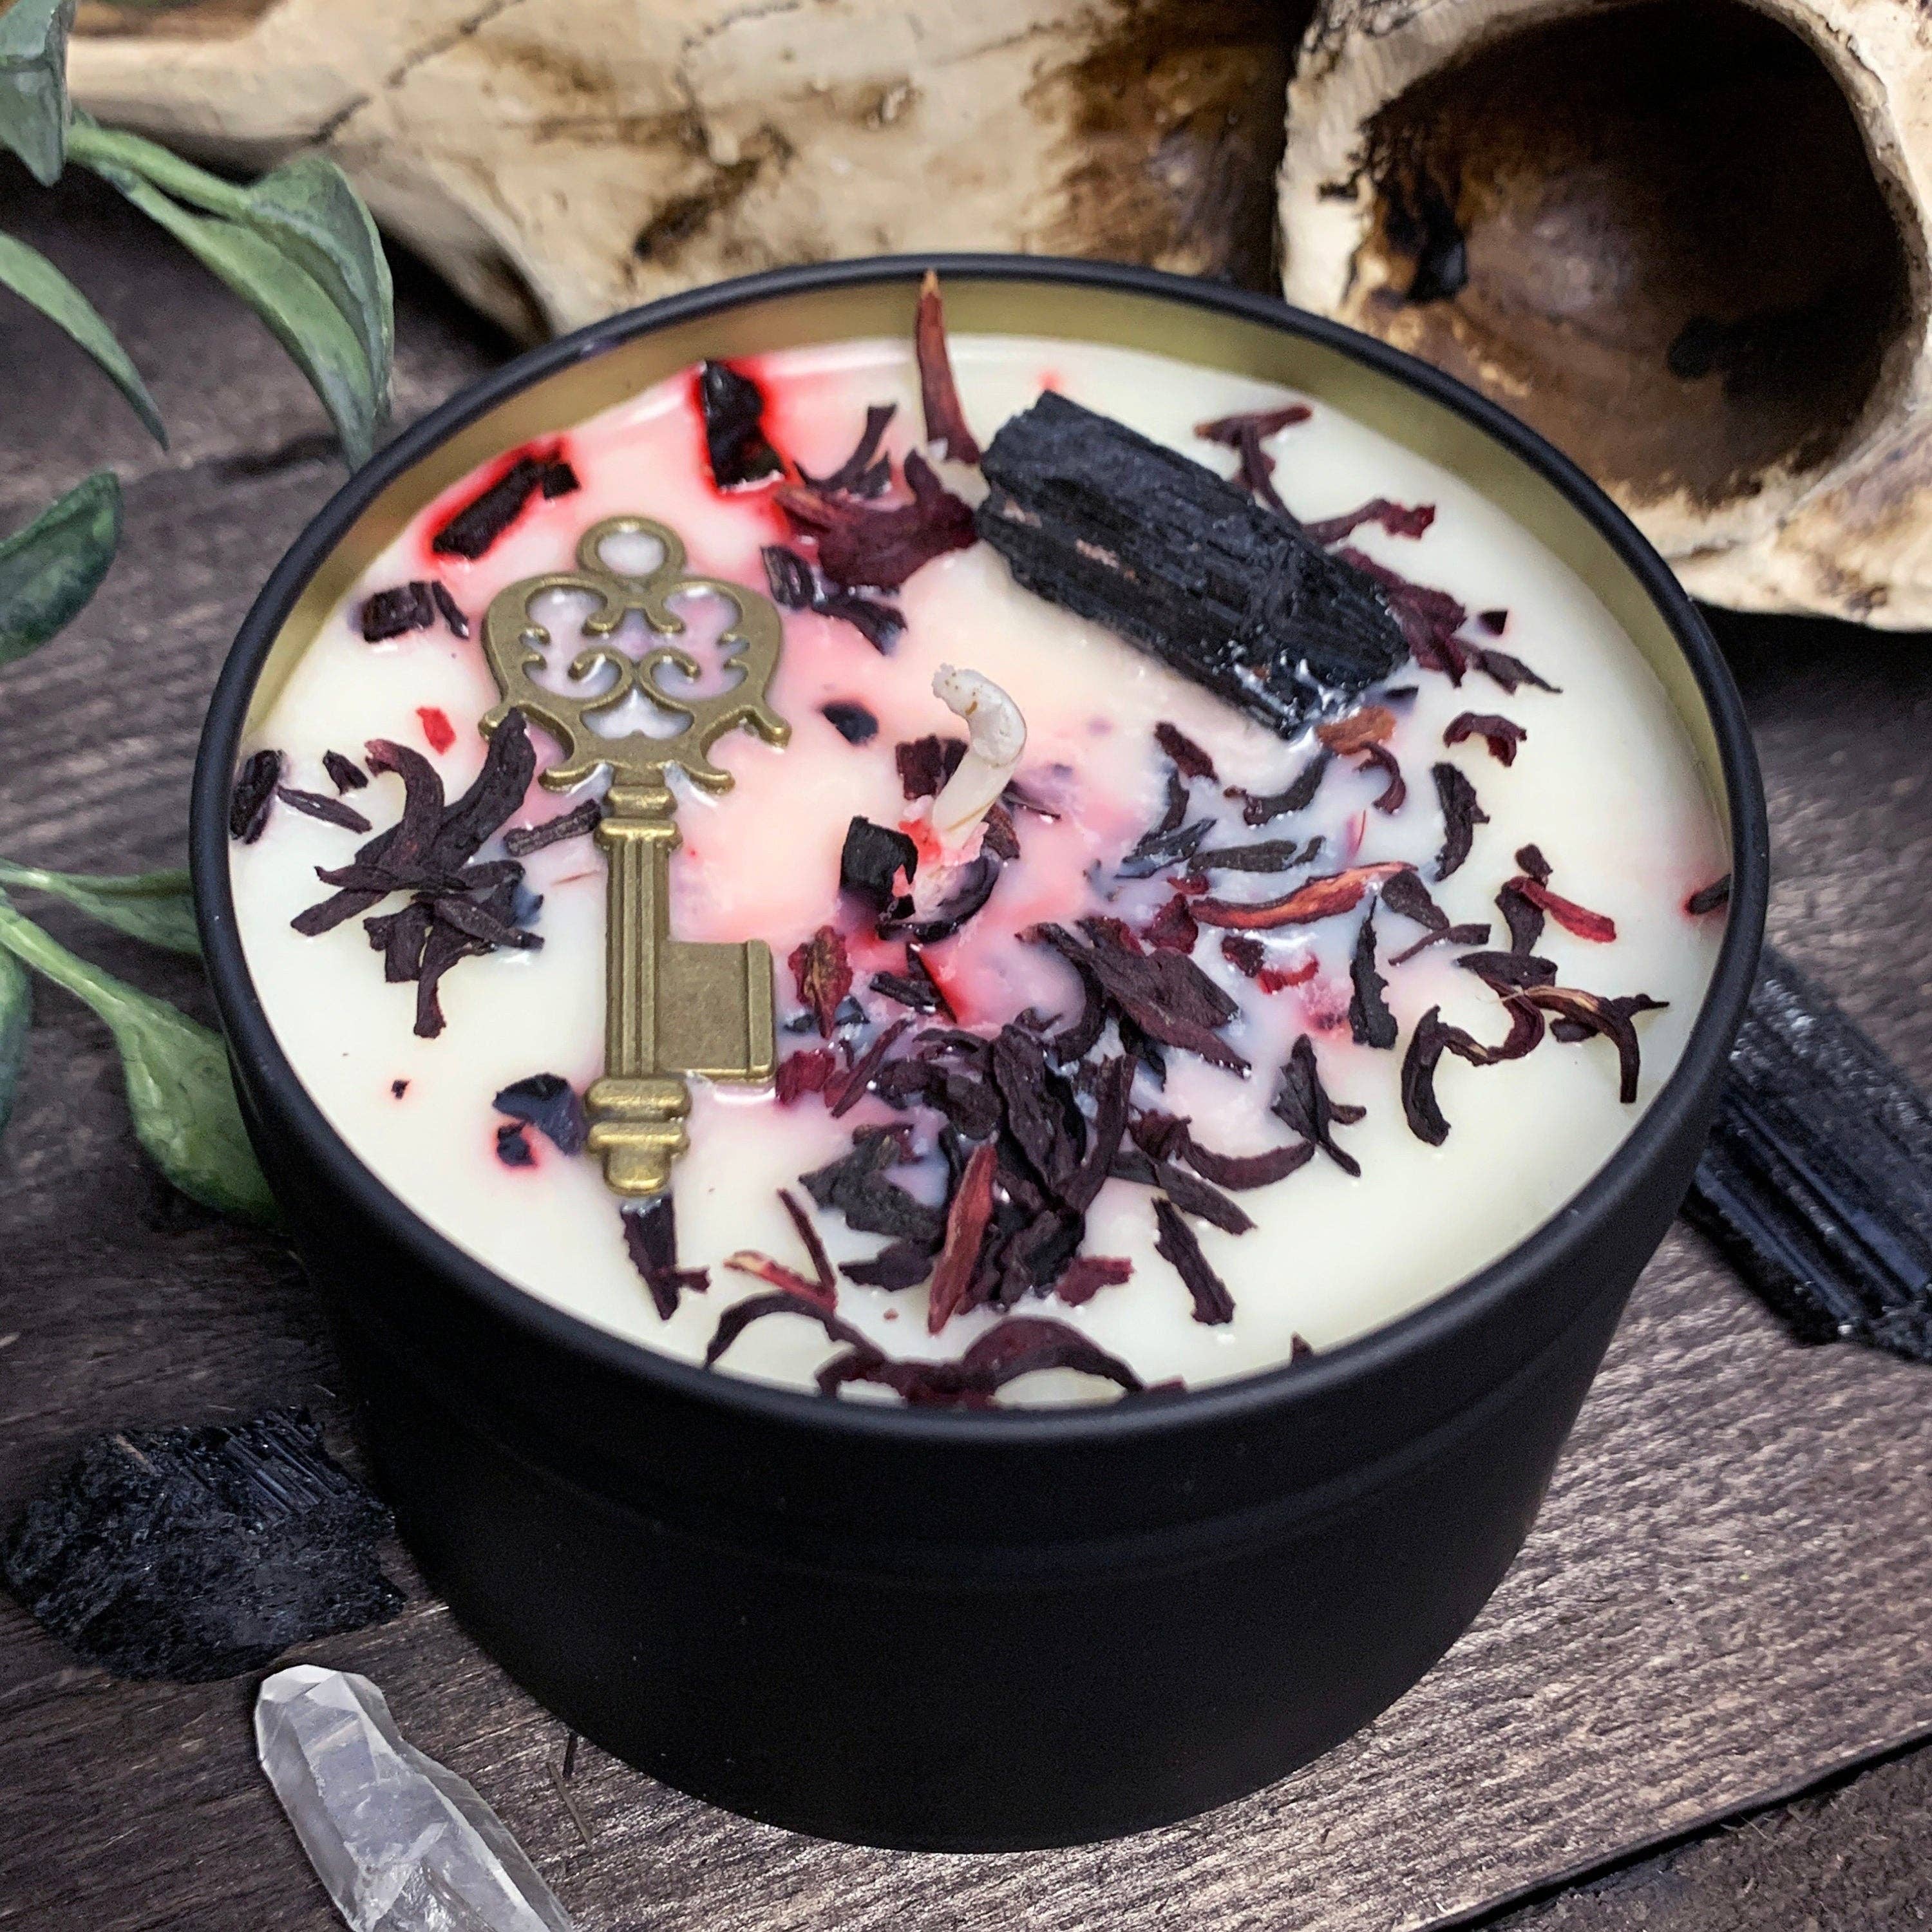 Hecate Candle